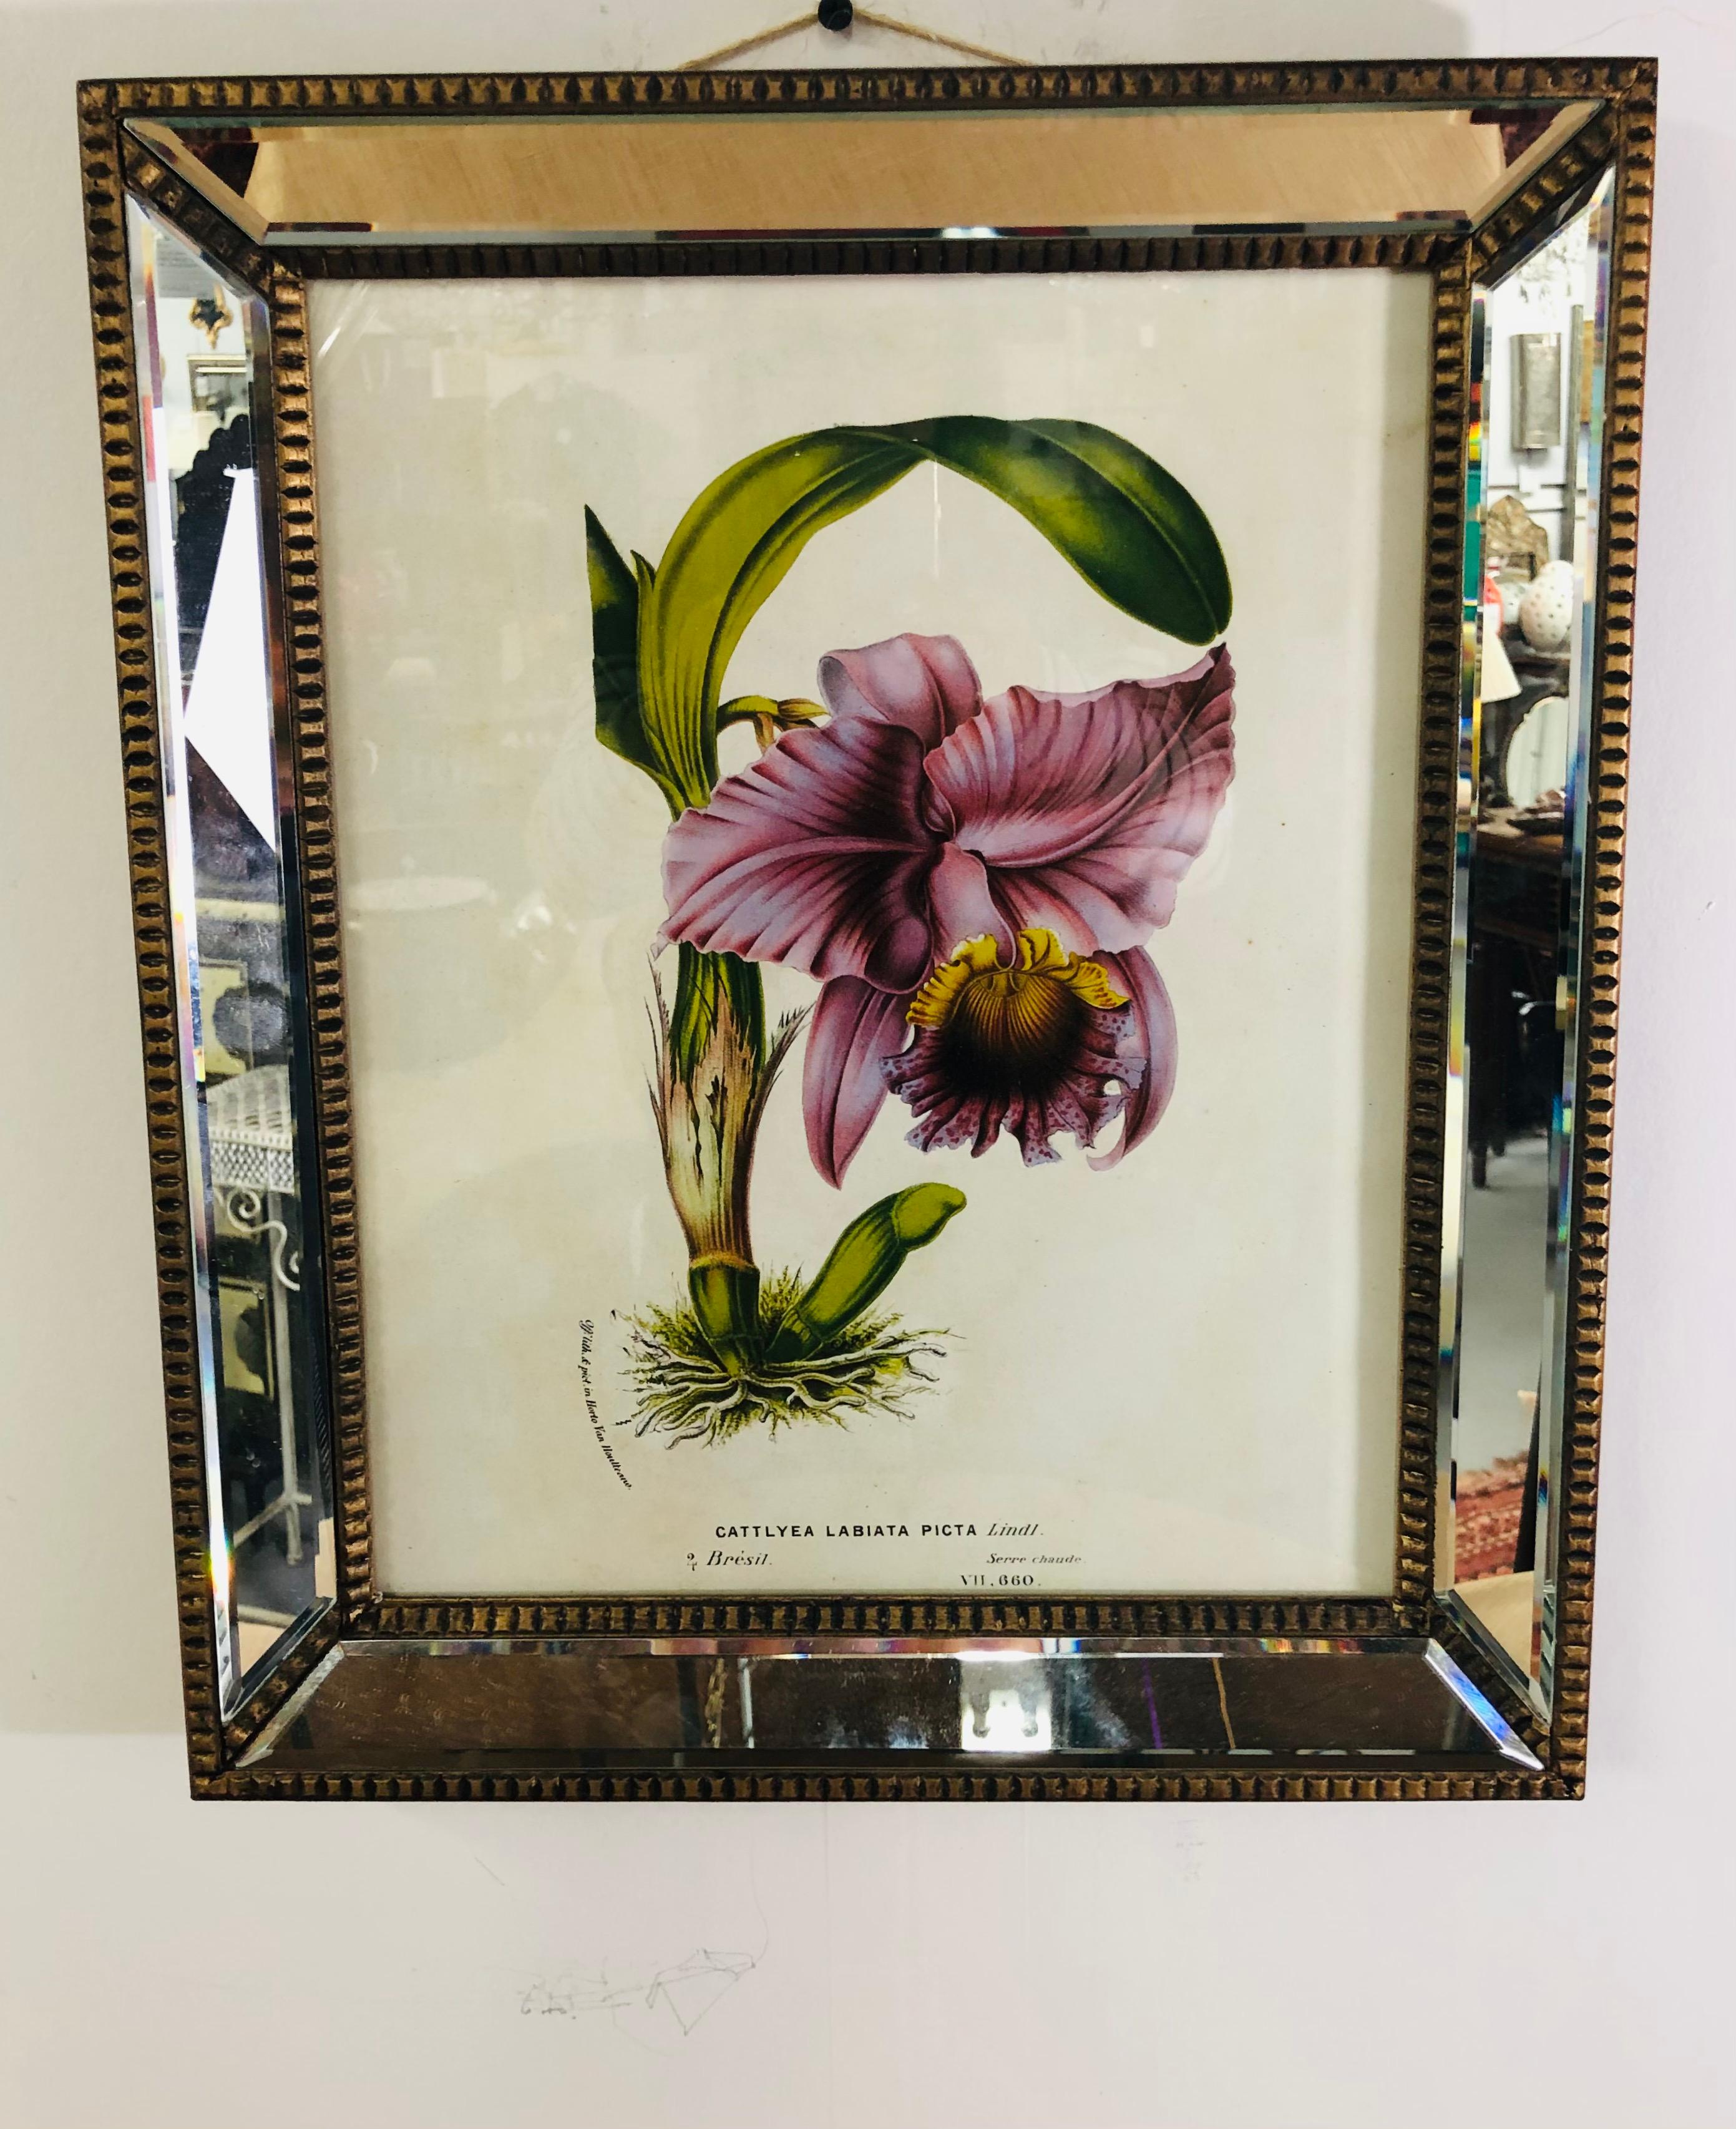 A set of 6 botanicals of Cattleya orchids found between south of Costa Rica to Argentina and discovered in late 19th century. The botanicals are titled and numbered. Each is framed in a mirrored custom fine and stylish frame. 

Measures: Each